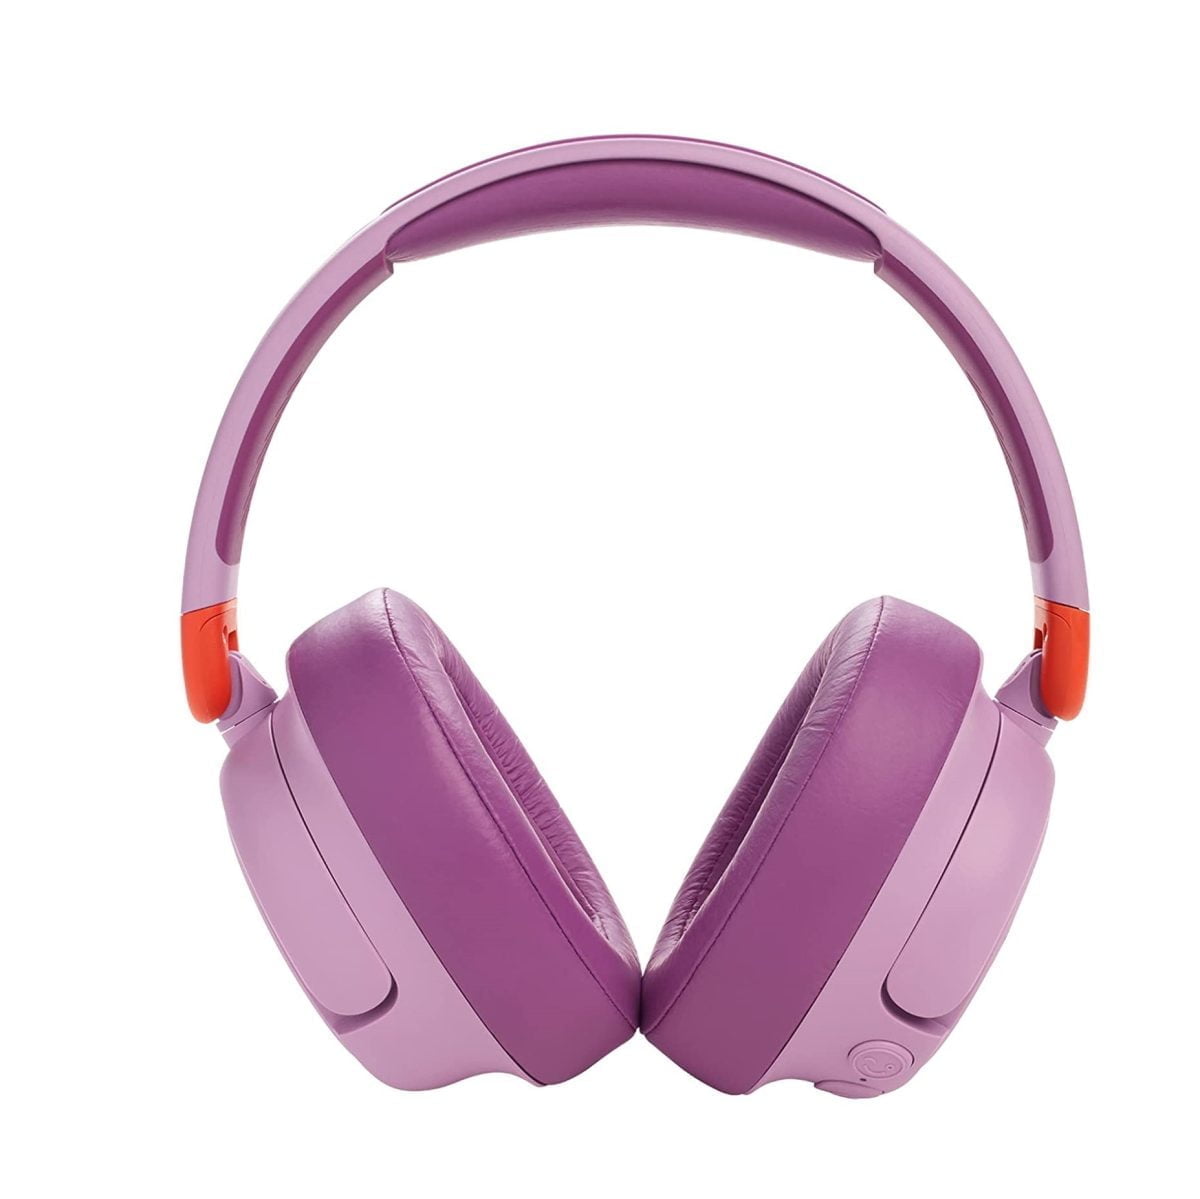 61Fjojagrpl. Ac Sl1500 Jbl &Lt;H1&Gt;Jbl Jr460Nc On-Ear Wireless Headphones For Kids, Pink&Lt;/H1&Gt;&Lt;Div Class=&Quot;Wpview Wpview-Wrap&Quot; Data-Wpview-Text=&Quot;Https%3A%2F%2Fwww.youtube.com%2Fwatch%3Fv%3Dmdaicwkv4Pg&Quot; Data-Wpview-Type=&Quot;Embedurl&Quot;&Gt;&Lt;Span Class=&Quot;Mce-Shim&Quot;&Gt;&Lt;/Span&Gt;&Lt;Span Class=&Quot;Wpview-End&Quot;&Gt;&Lt;/Span&Gt;&Lt;/Div&Gt;&Lt;P&Gt;Quality Sound Has No Age, But You Want To Be Sure Your Kids Are Safe While Having Fun. With A Maximum Volume Set Under 85Db, They’re Free To Enjoy Jbl Quality Sound, Safely. Shut Out All That Noise And Distraction With Active Noise Cancelling. Your Kids Can Stay Focused Whether They’re Listening To Music, Enjoying Their Favorite Show Or Learning Online. Help Your Kids Stay Connected To The World With The Built-In Mic. They Can Chat Easily With Friends And Family During Downtime, Or Teachers While They’re Busy Learning.&Lt;/P&Gt; Jbl Headphone Jbl Jr460Nc Wireless Over-Ear Noise Cancelling Kids Headphones - Pink